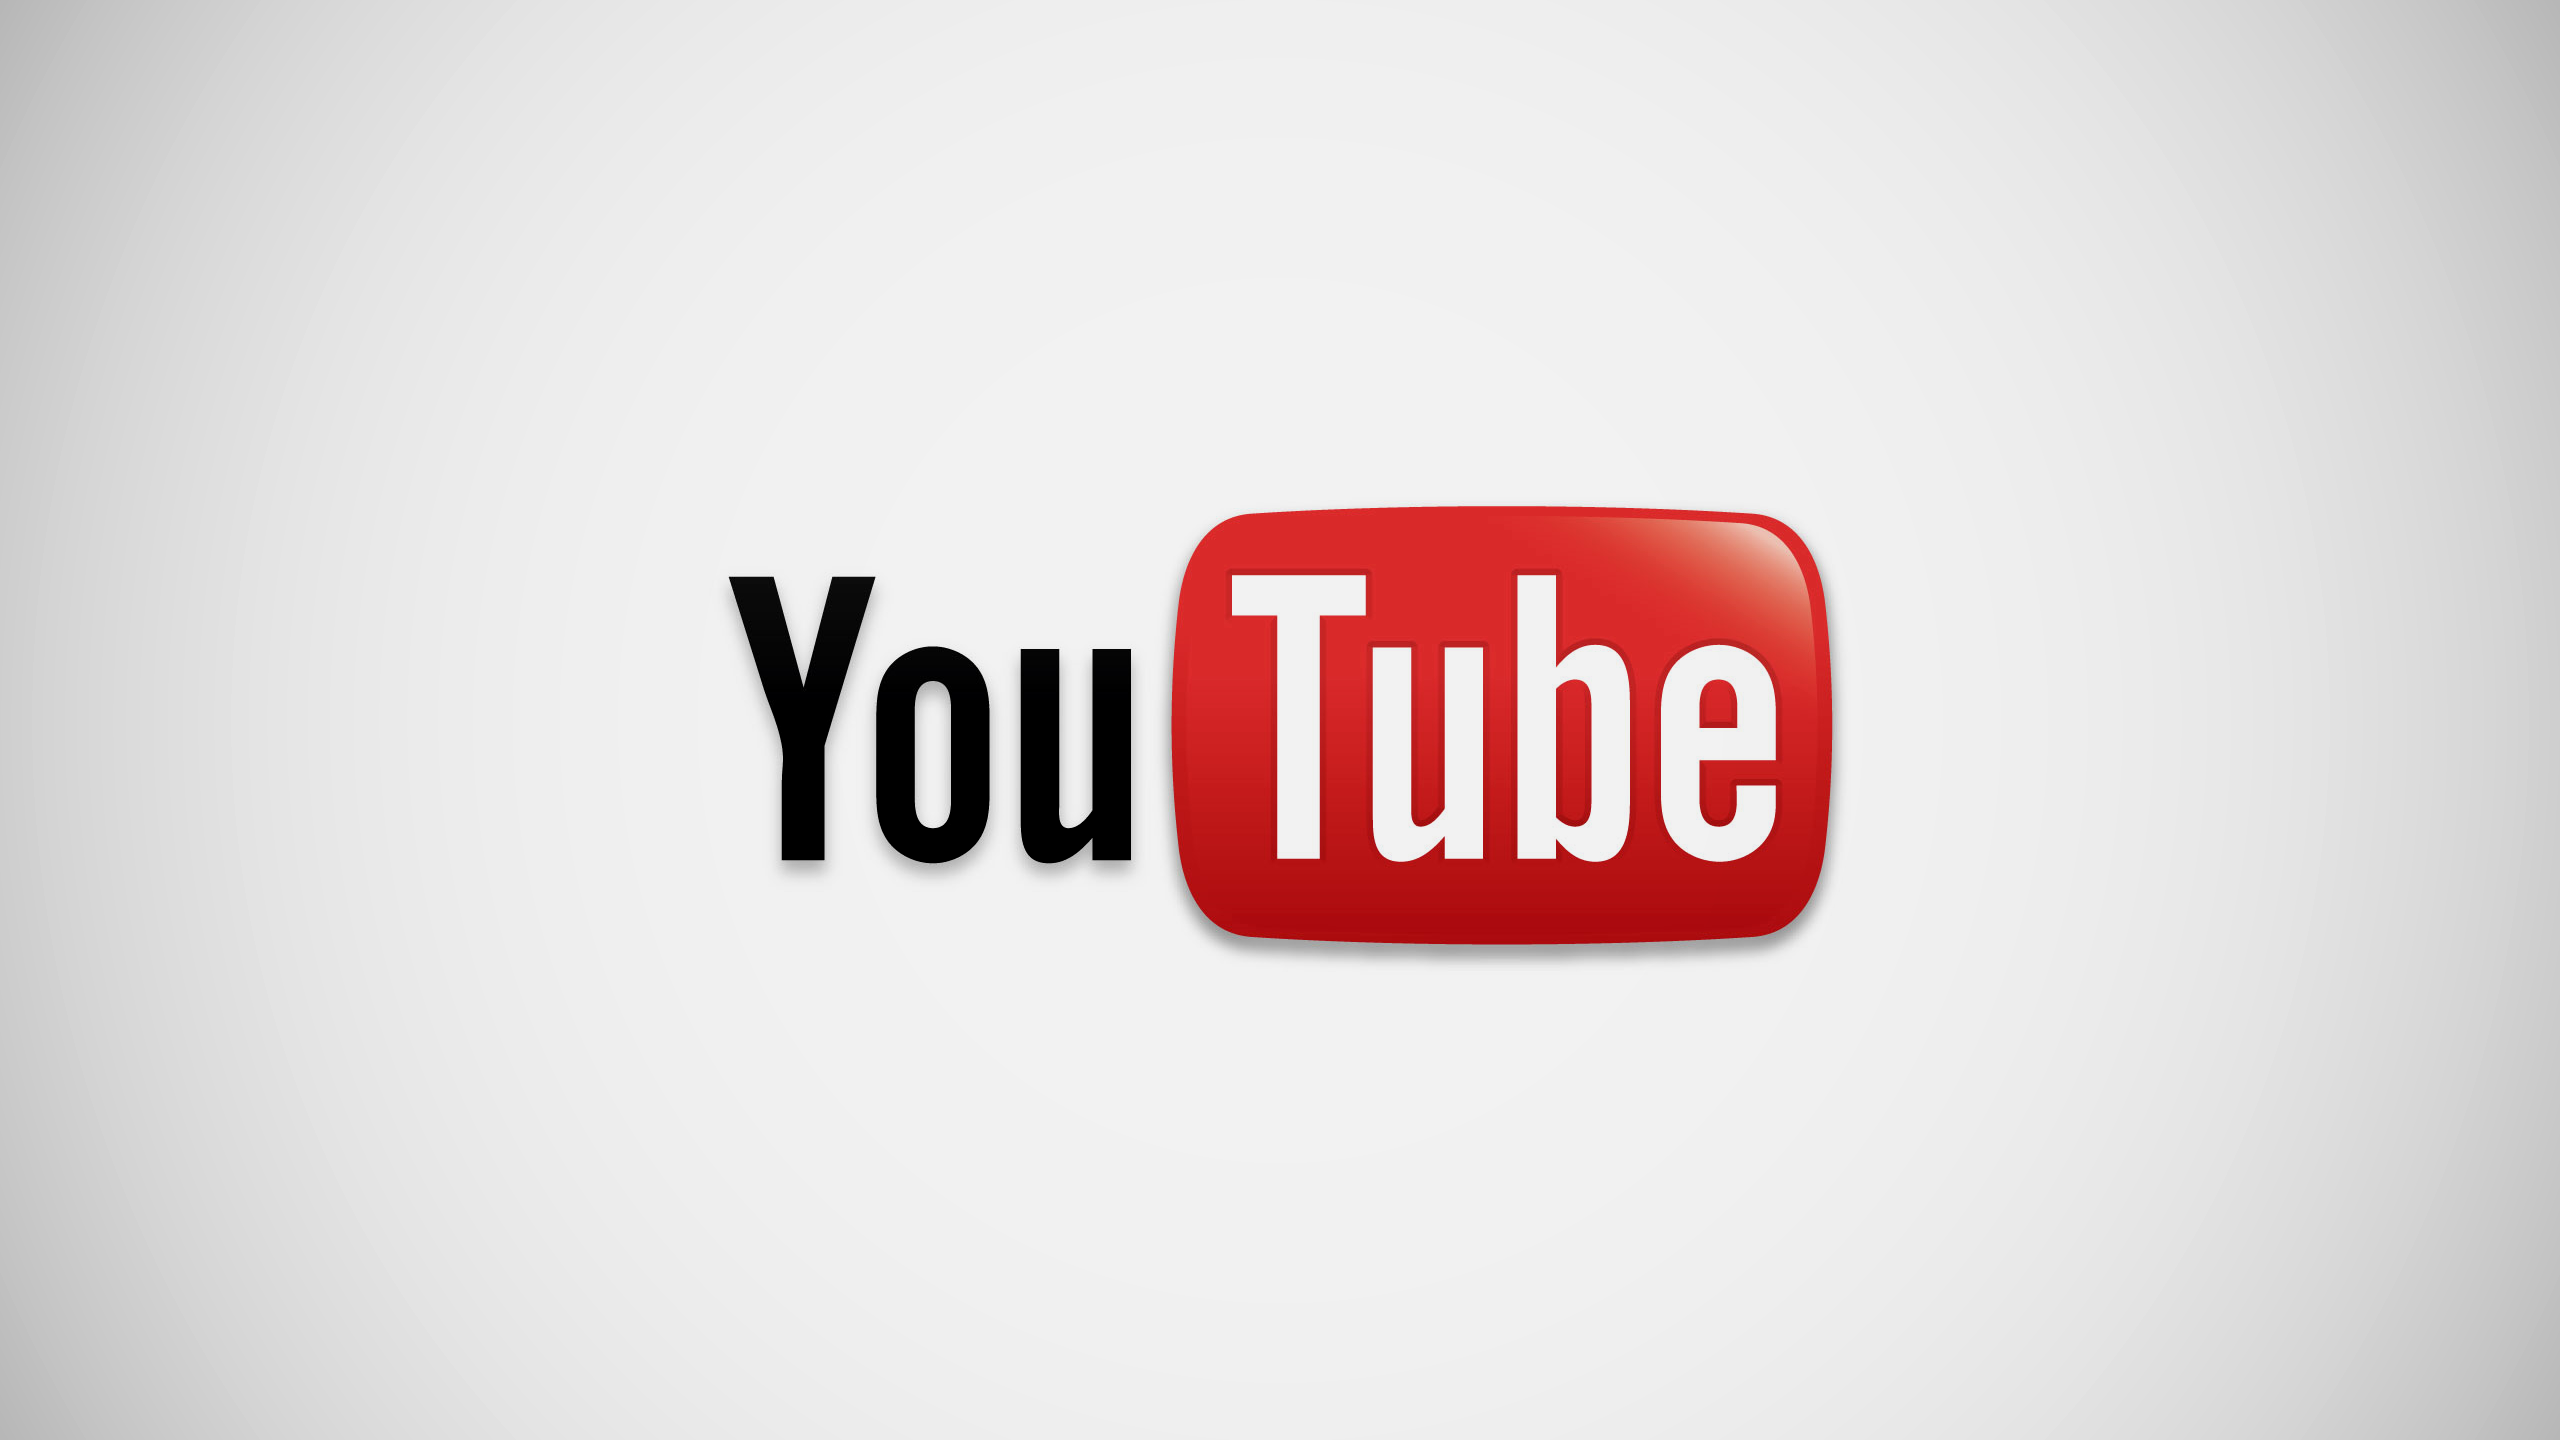 youtube download 1080